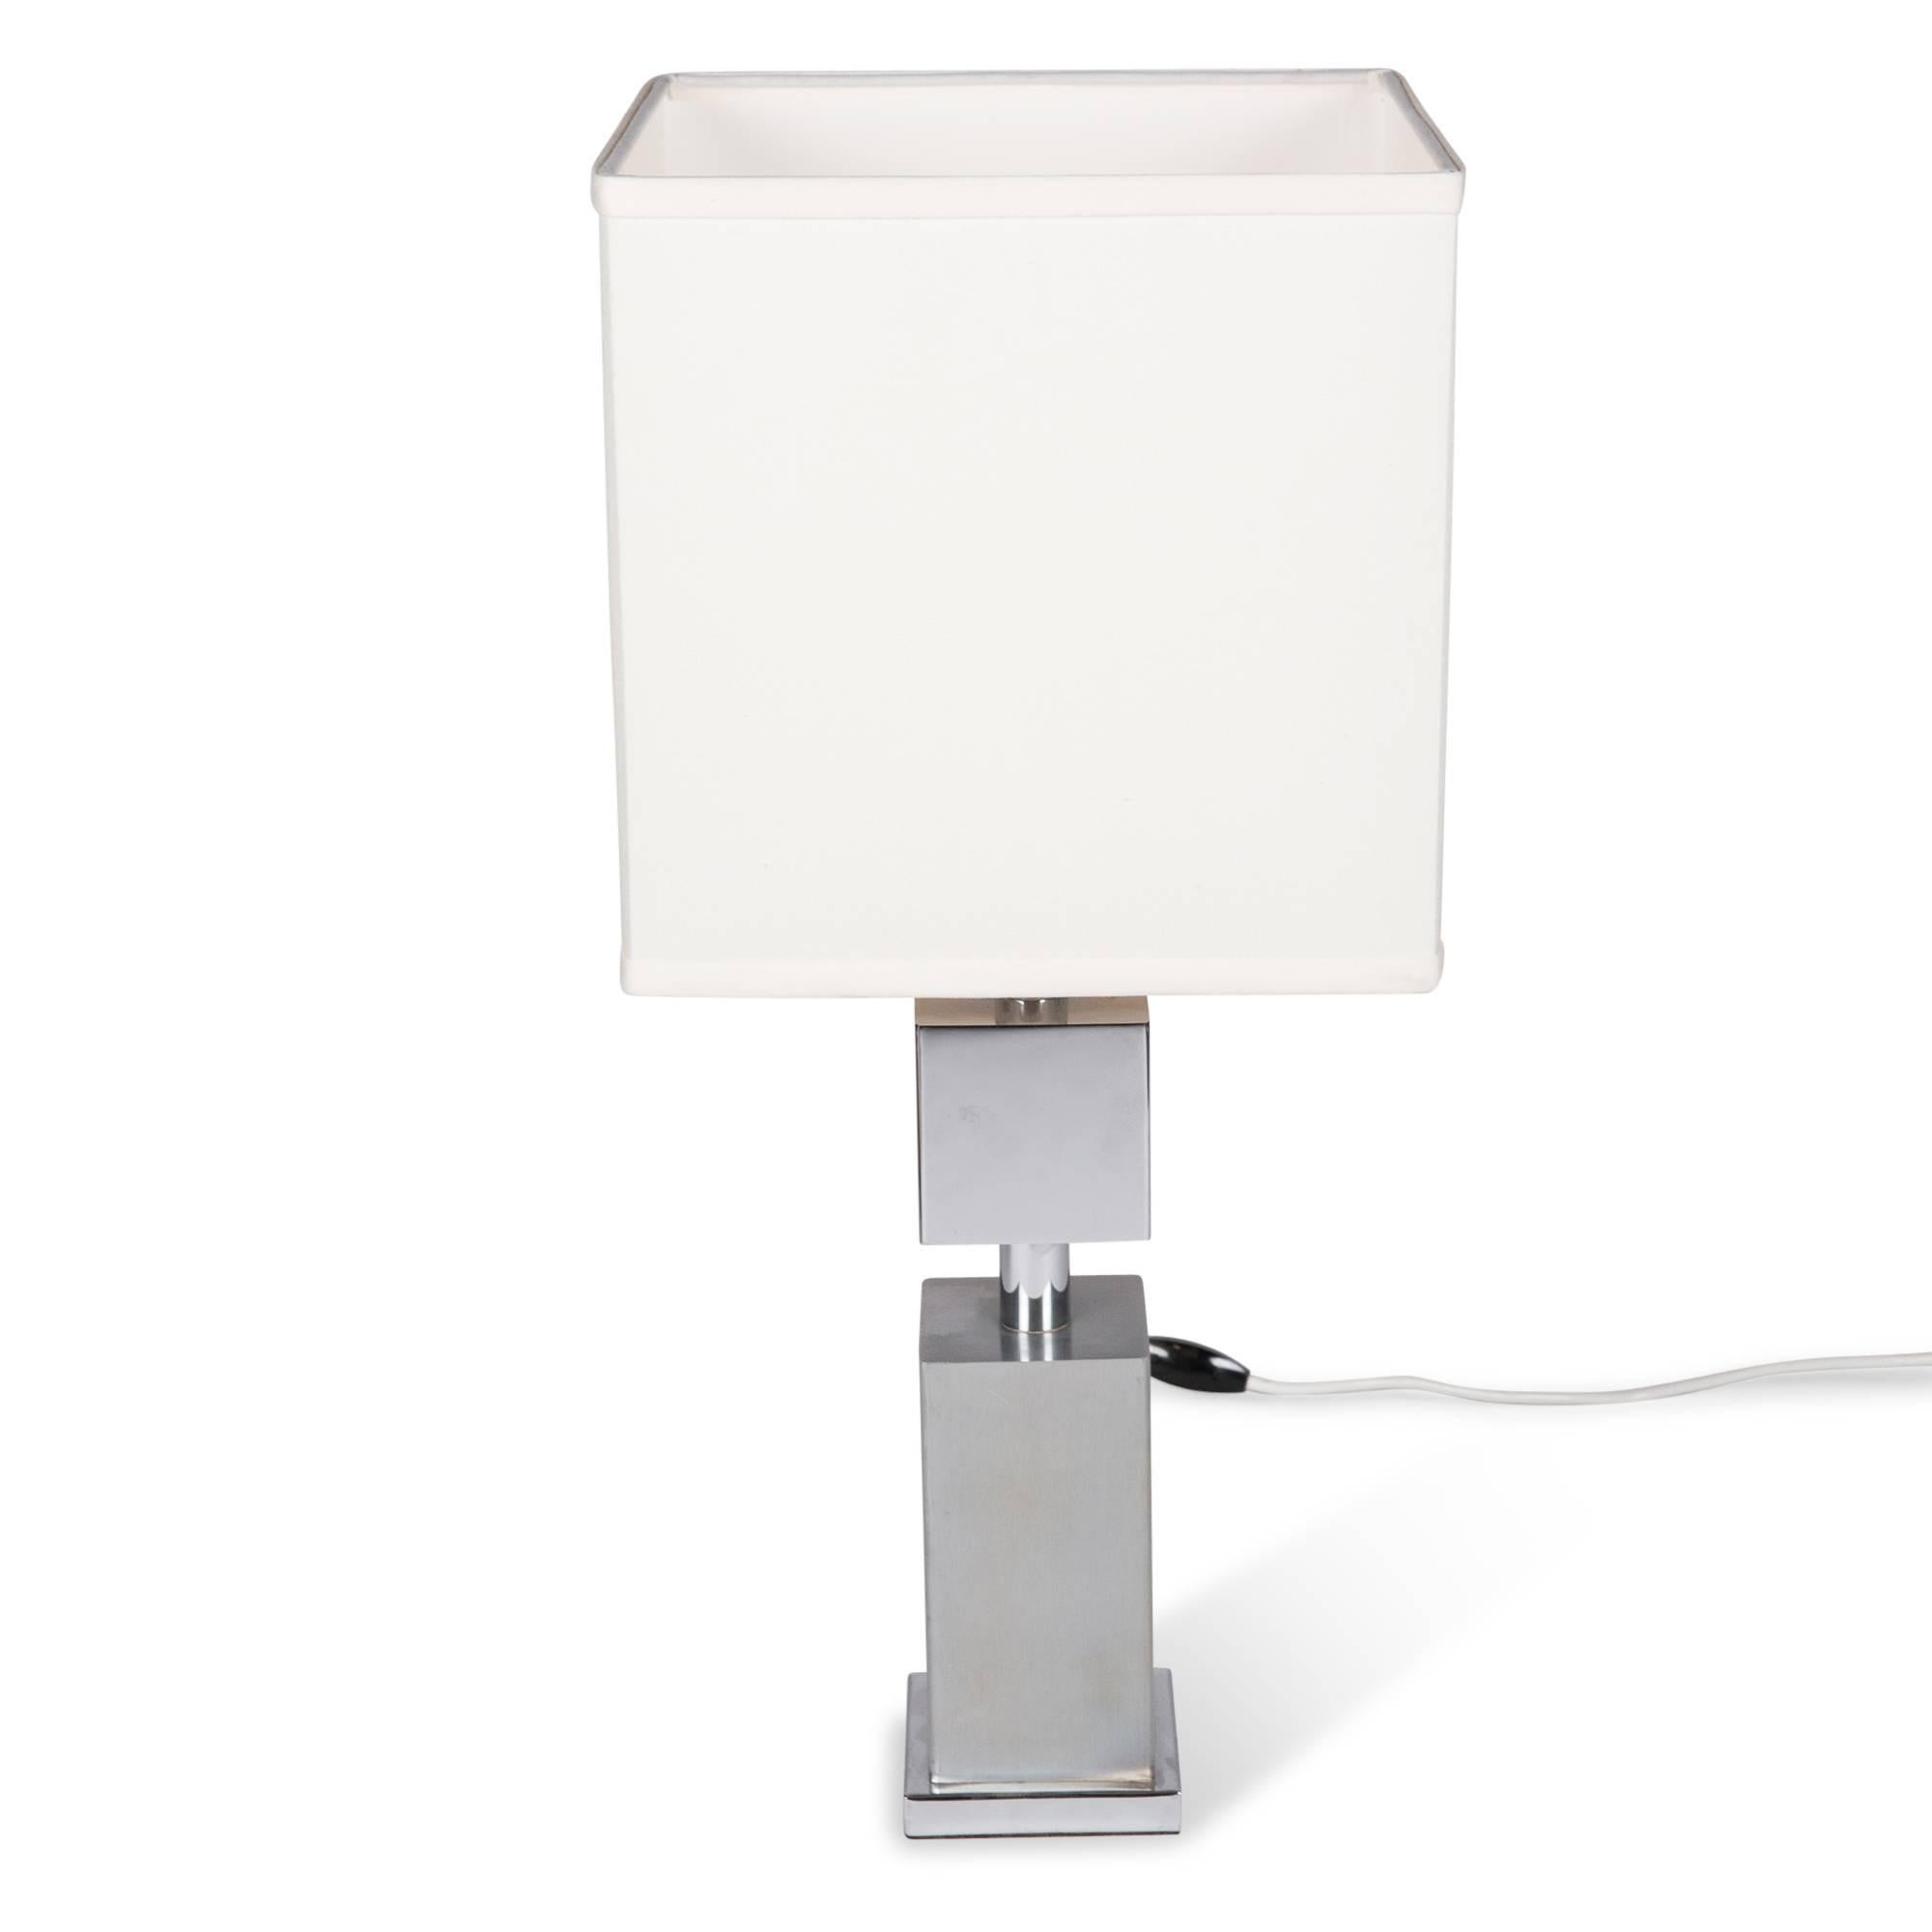 Chrome table lamp, square column based with superposed chrome cube, France, 1970s. Overall height 23 1/2 in, base measures 4 in square. Shade measures 10 in x 10 in, shade height 10 in.